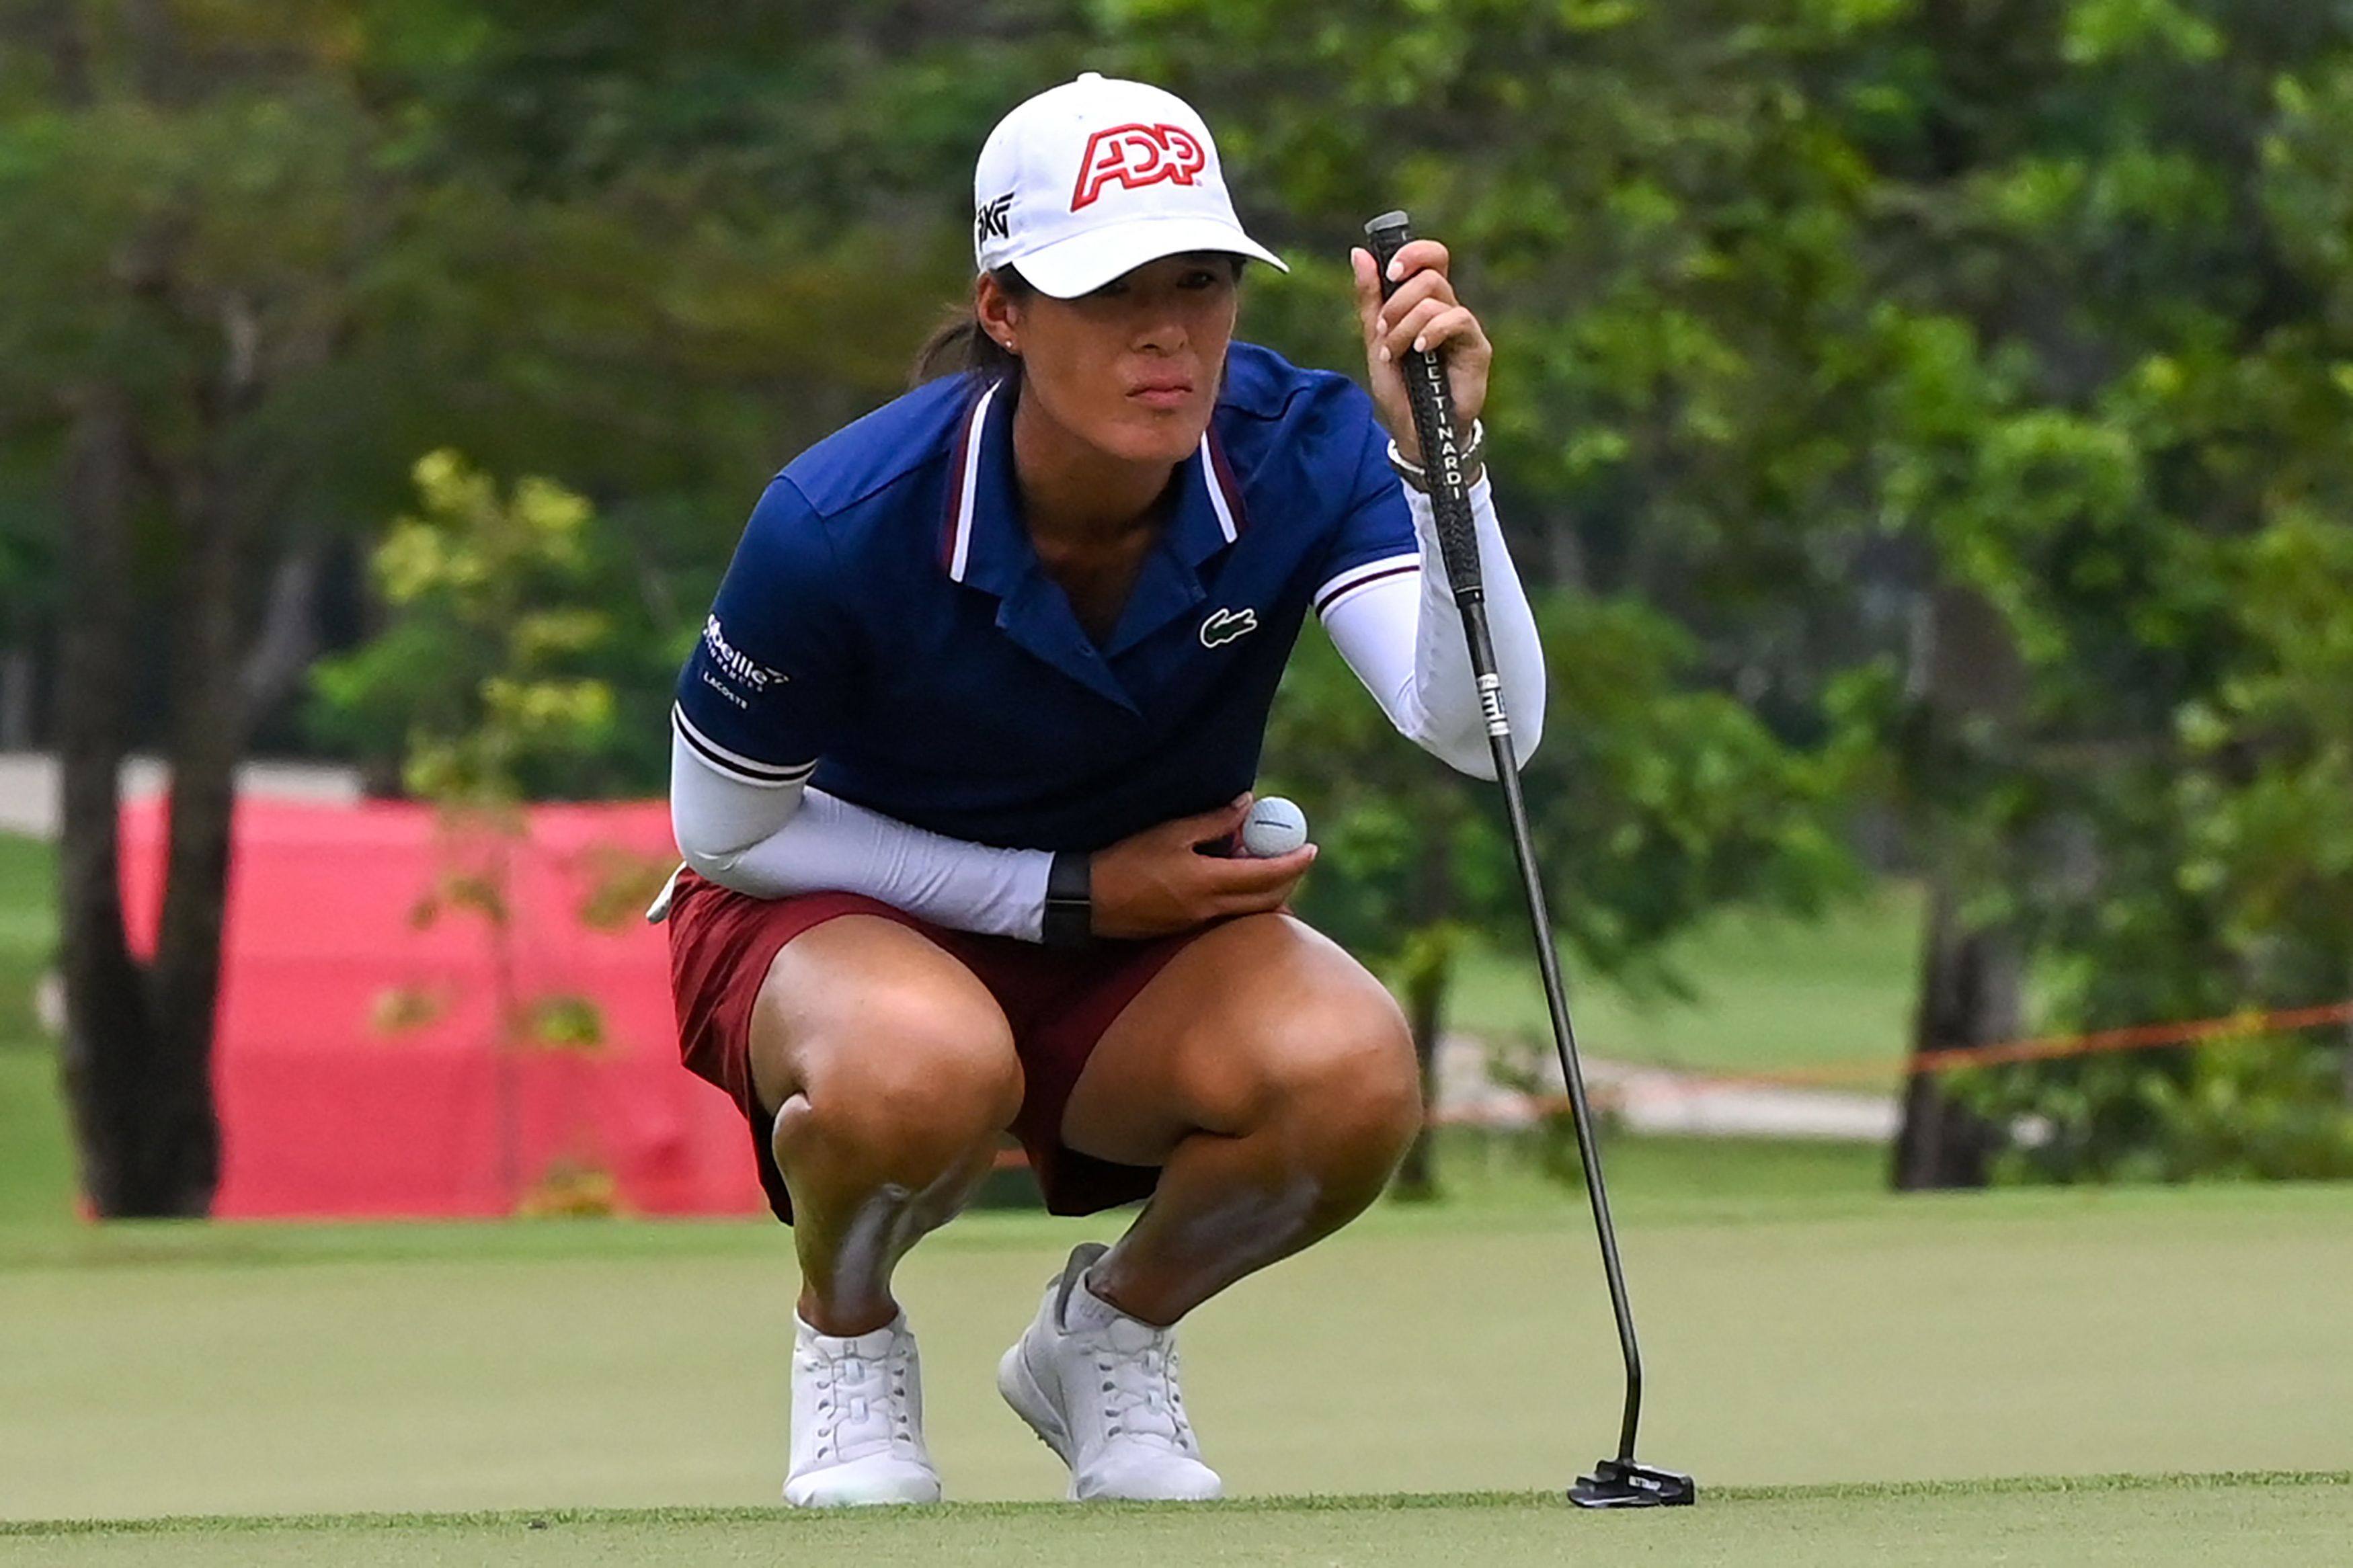 Celine Boutier of France lines up a putt during the second round of the HSBC Women’s World Championship at Sentosa Golf Club. Photo: AFP